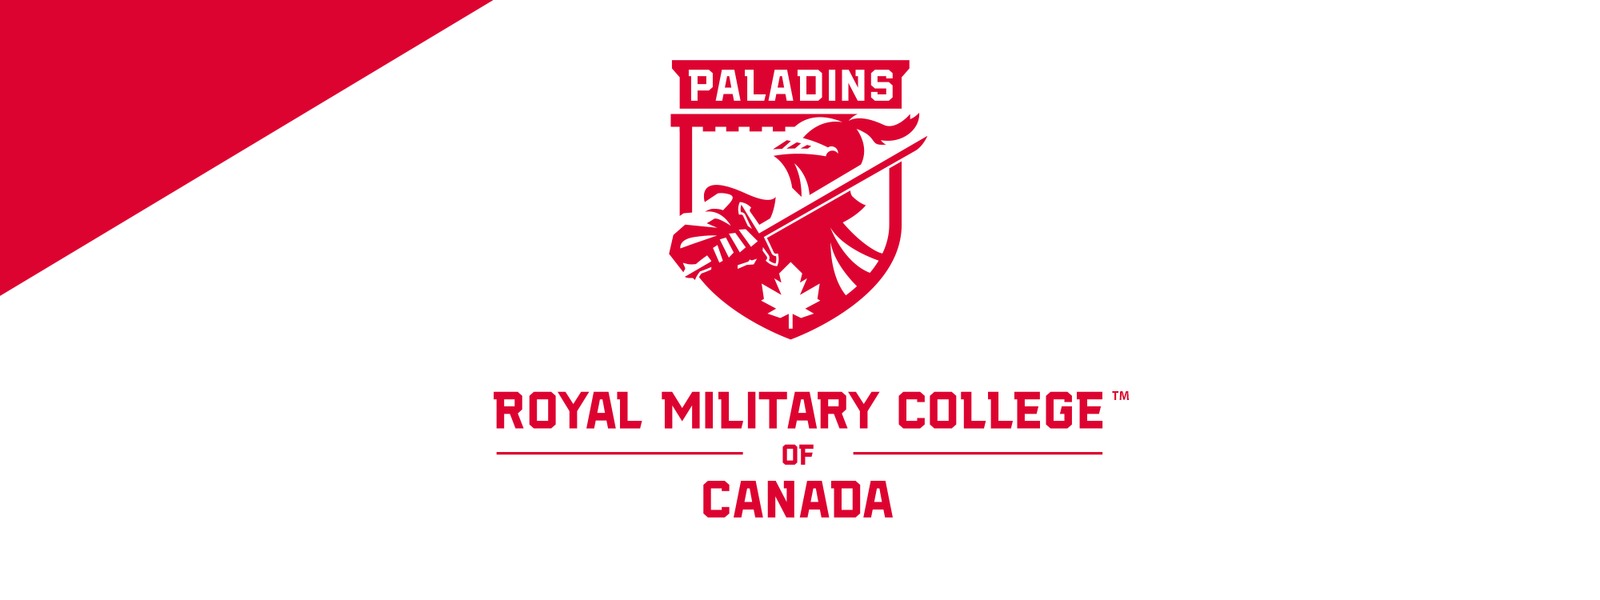 Royal Military College of Canada  logo